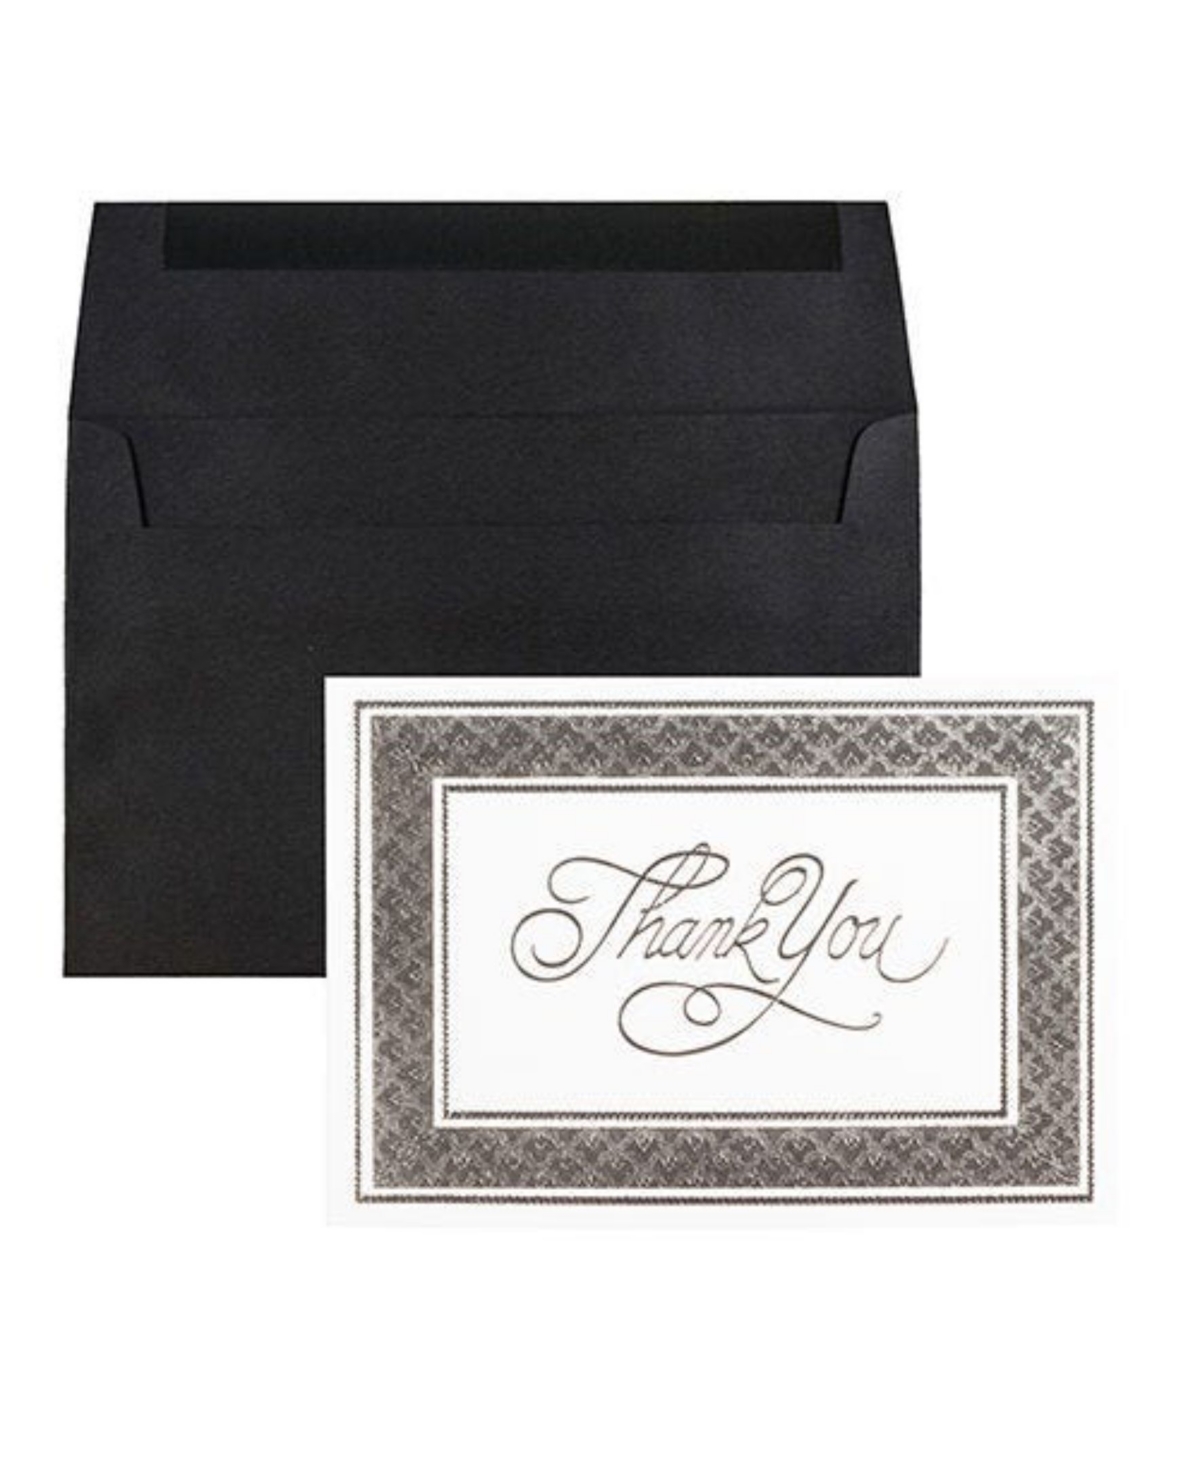 Jam Paper Thank You Card Sets In Silver Border Cards With Black Linen Env